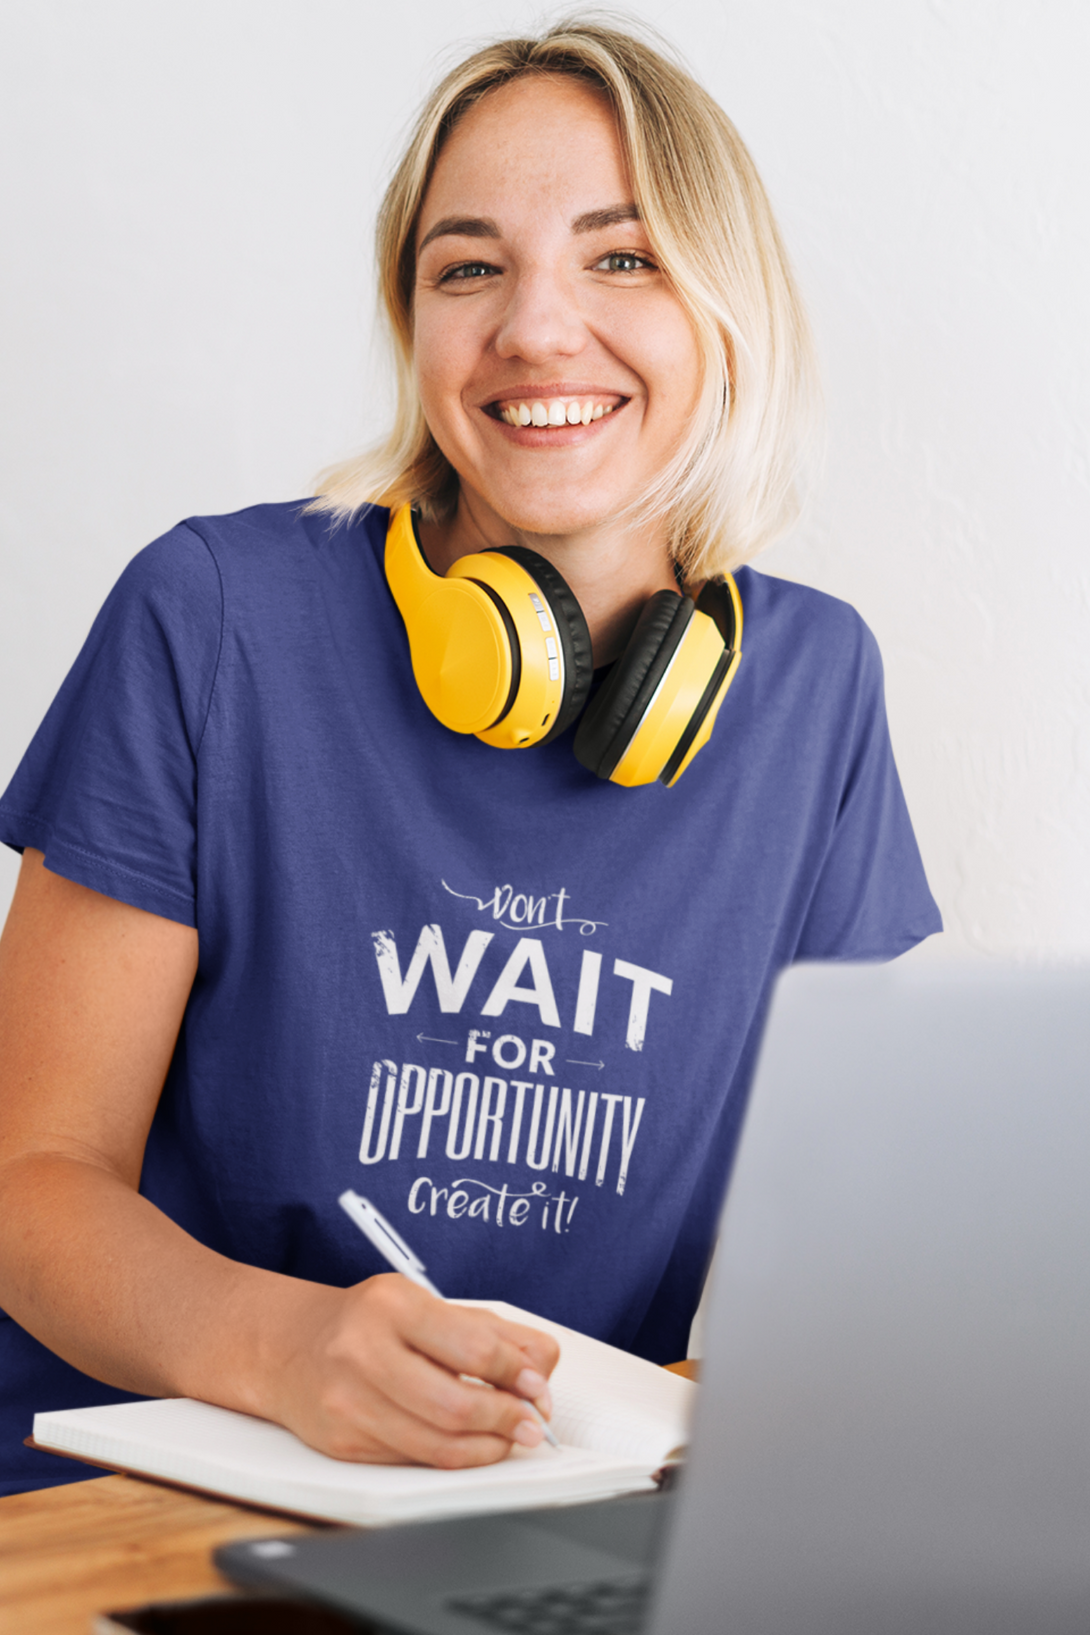 Create Opportunity Printed T-Shirt For Women - WowWaves - 3